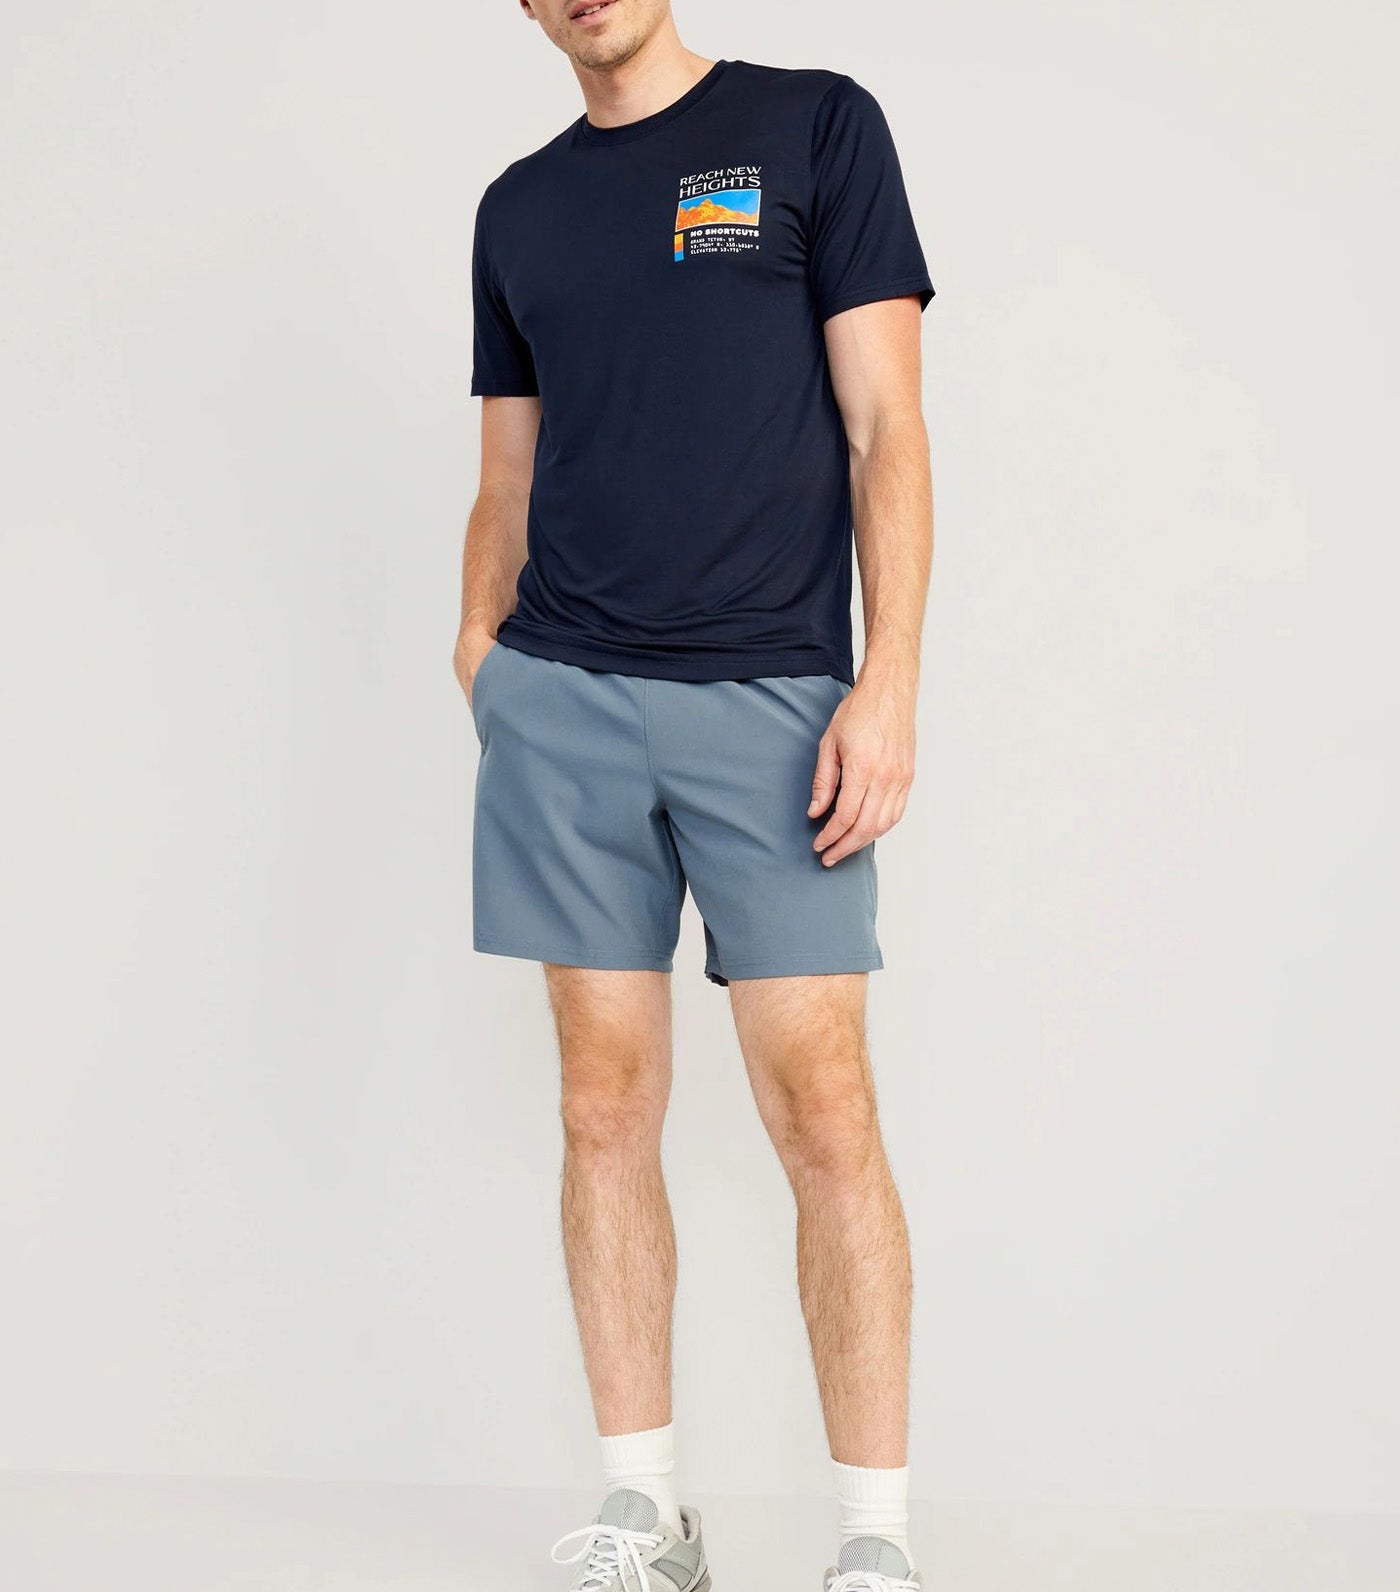 Cloud 94 Soft Go-Dry Cool Graphic T-Shirt for Men In the Navy